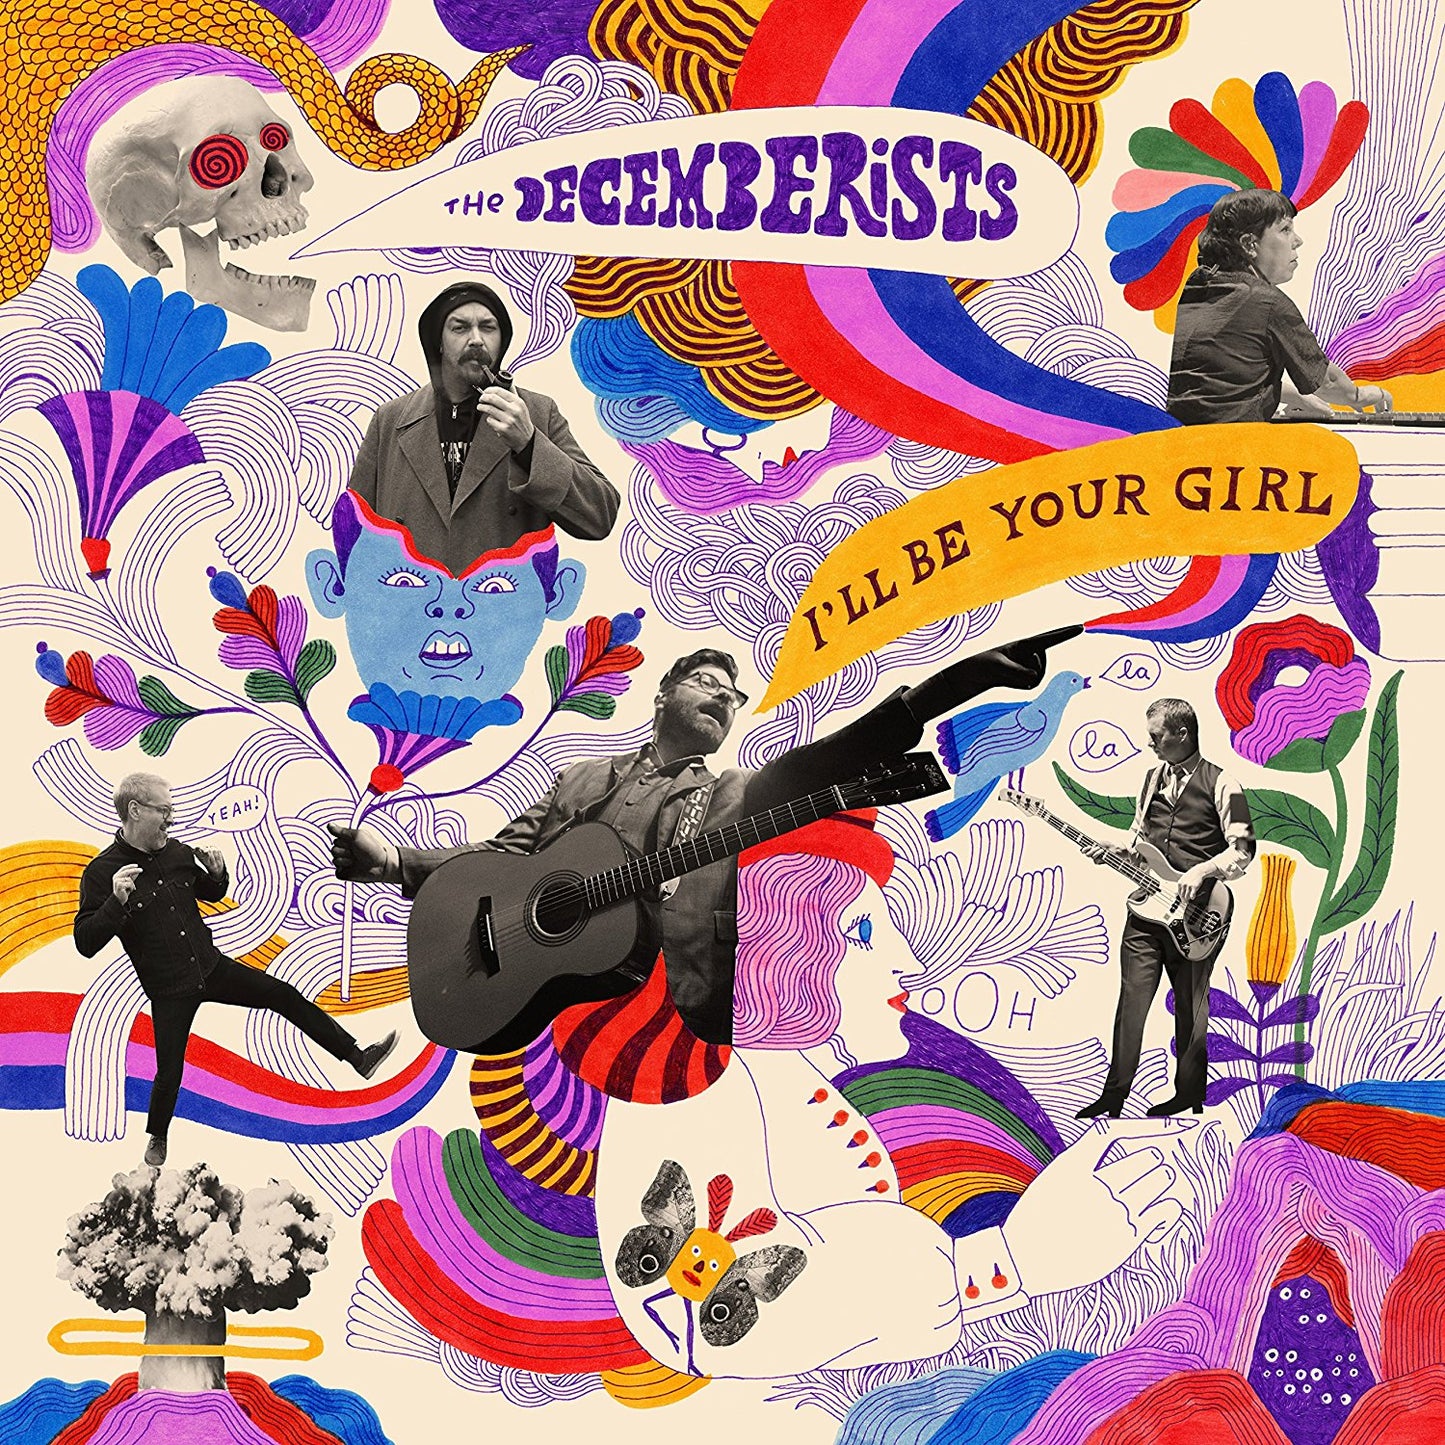 The Decemberists - I'll Be Your Girl - CD